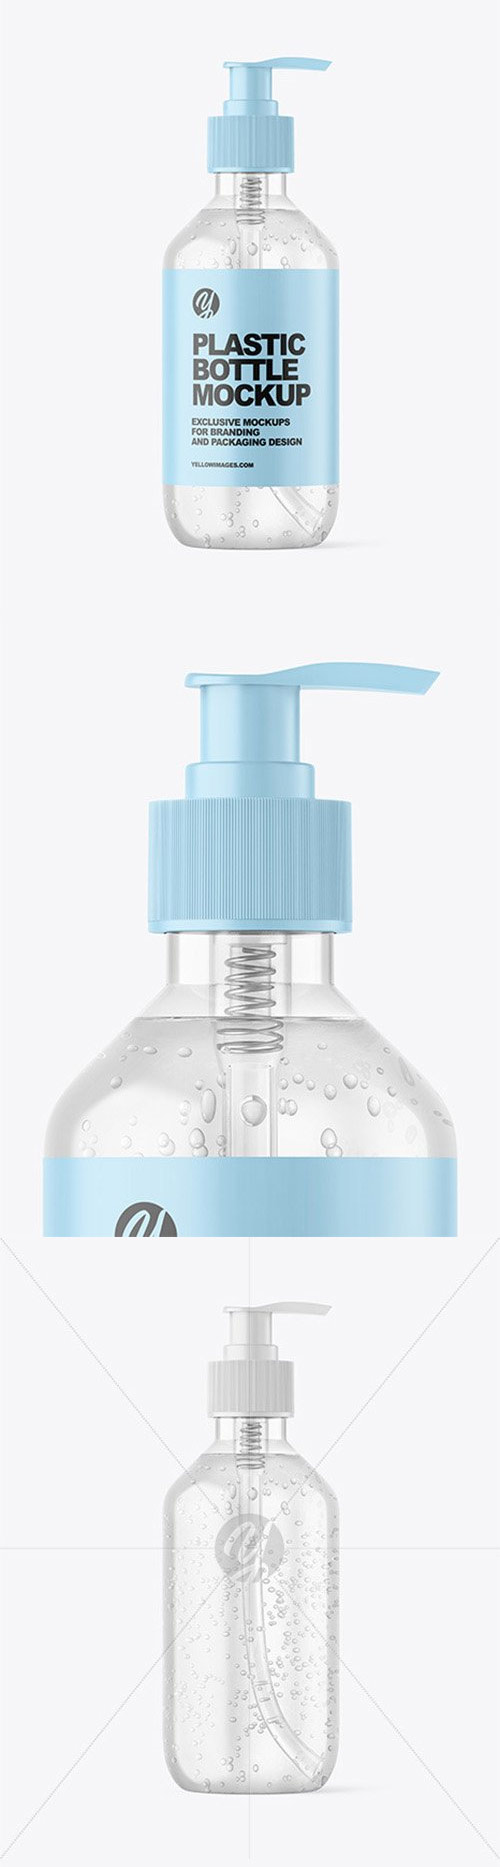 Clear Cosmetic Bottle with Pump Mockup 79931